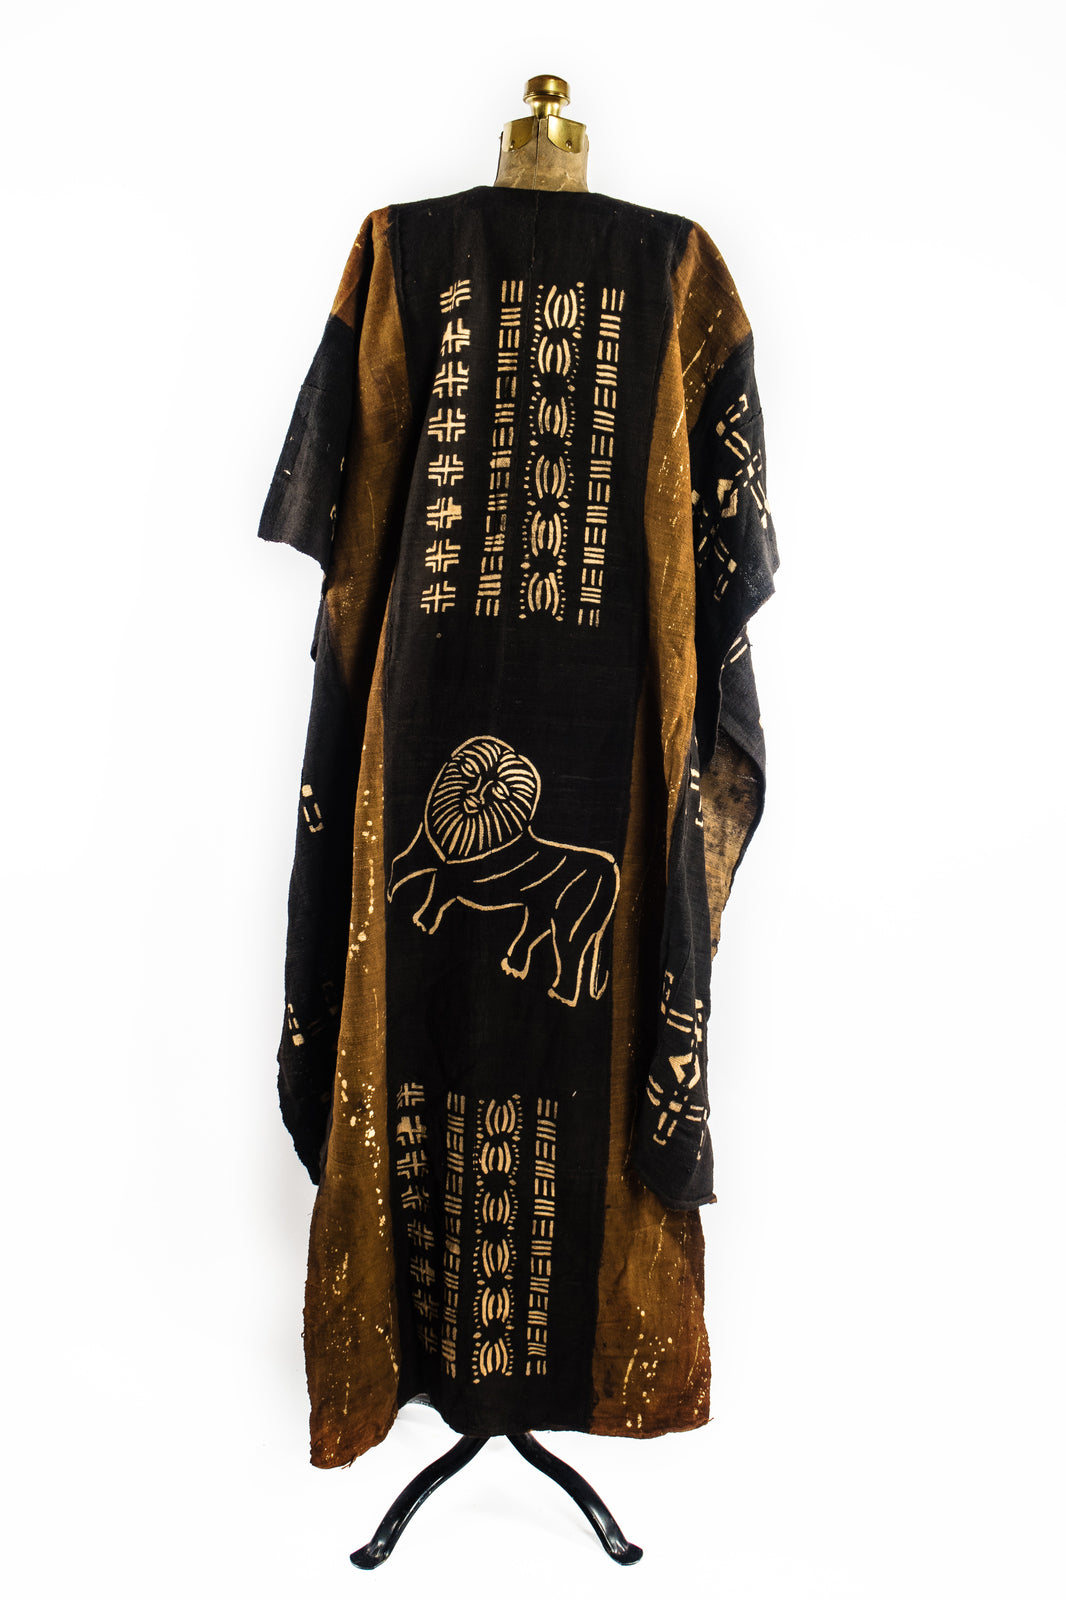 Handcrafted Mudcloth Clothing - African Art - Handmade - Clothing - This Dyed Black Brown Mudcloth Poncho adds a unique, authentic African aesthetic to any ensemble. Crafted with artisanal dying processes and traditional weaving methods, Cotton Bogolan fabric ensures every piece is one-of-a-kind. The natural, handmade look adds an exotic, eye-catching flair to any wardrobe.  Large, Unisex  Full Length: 55